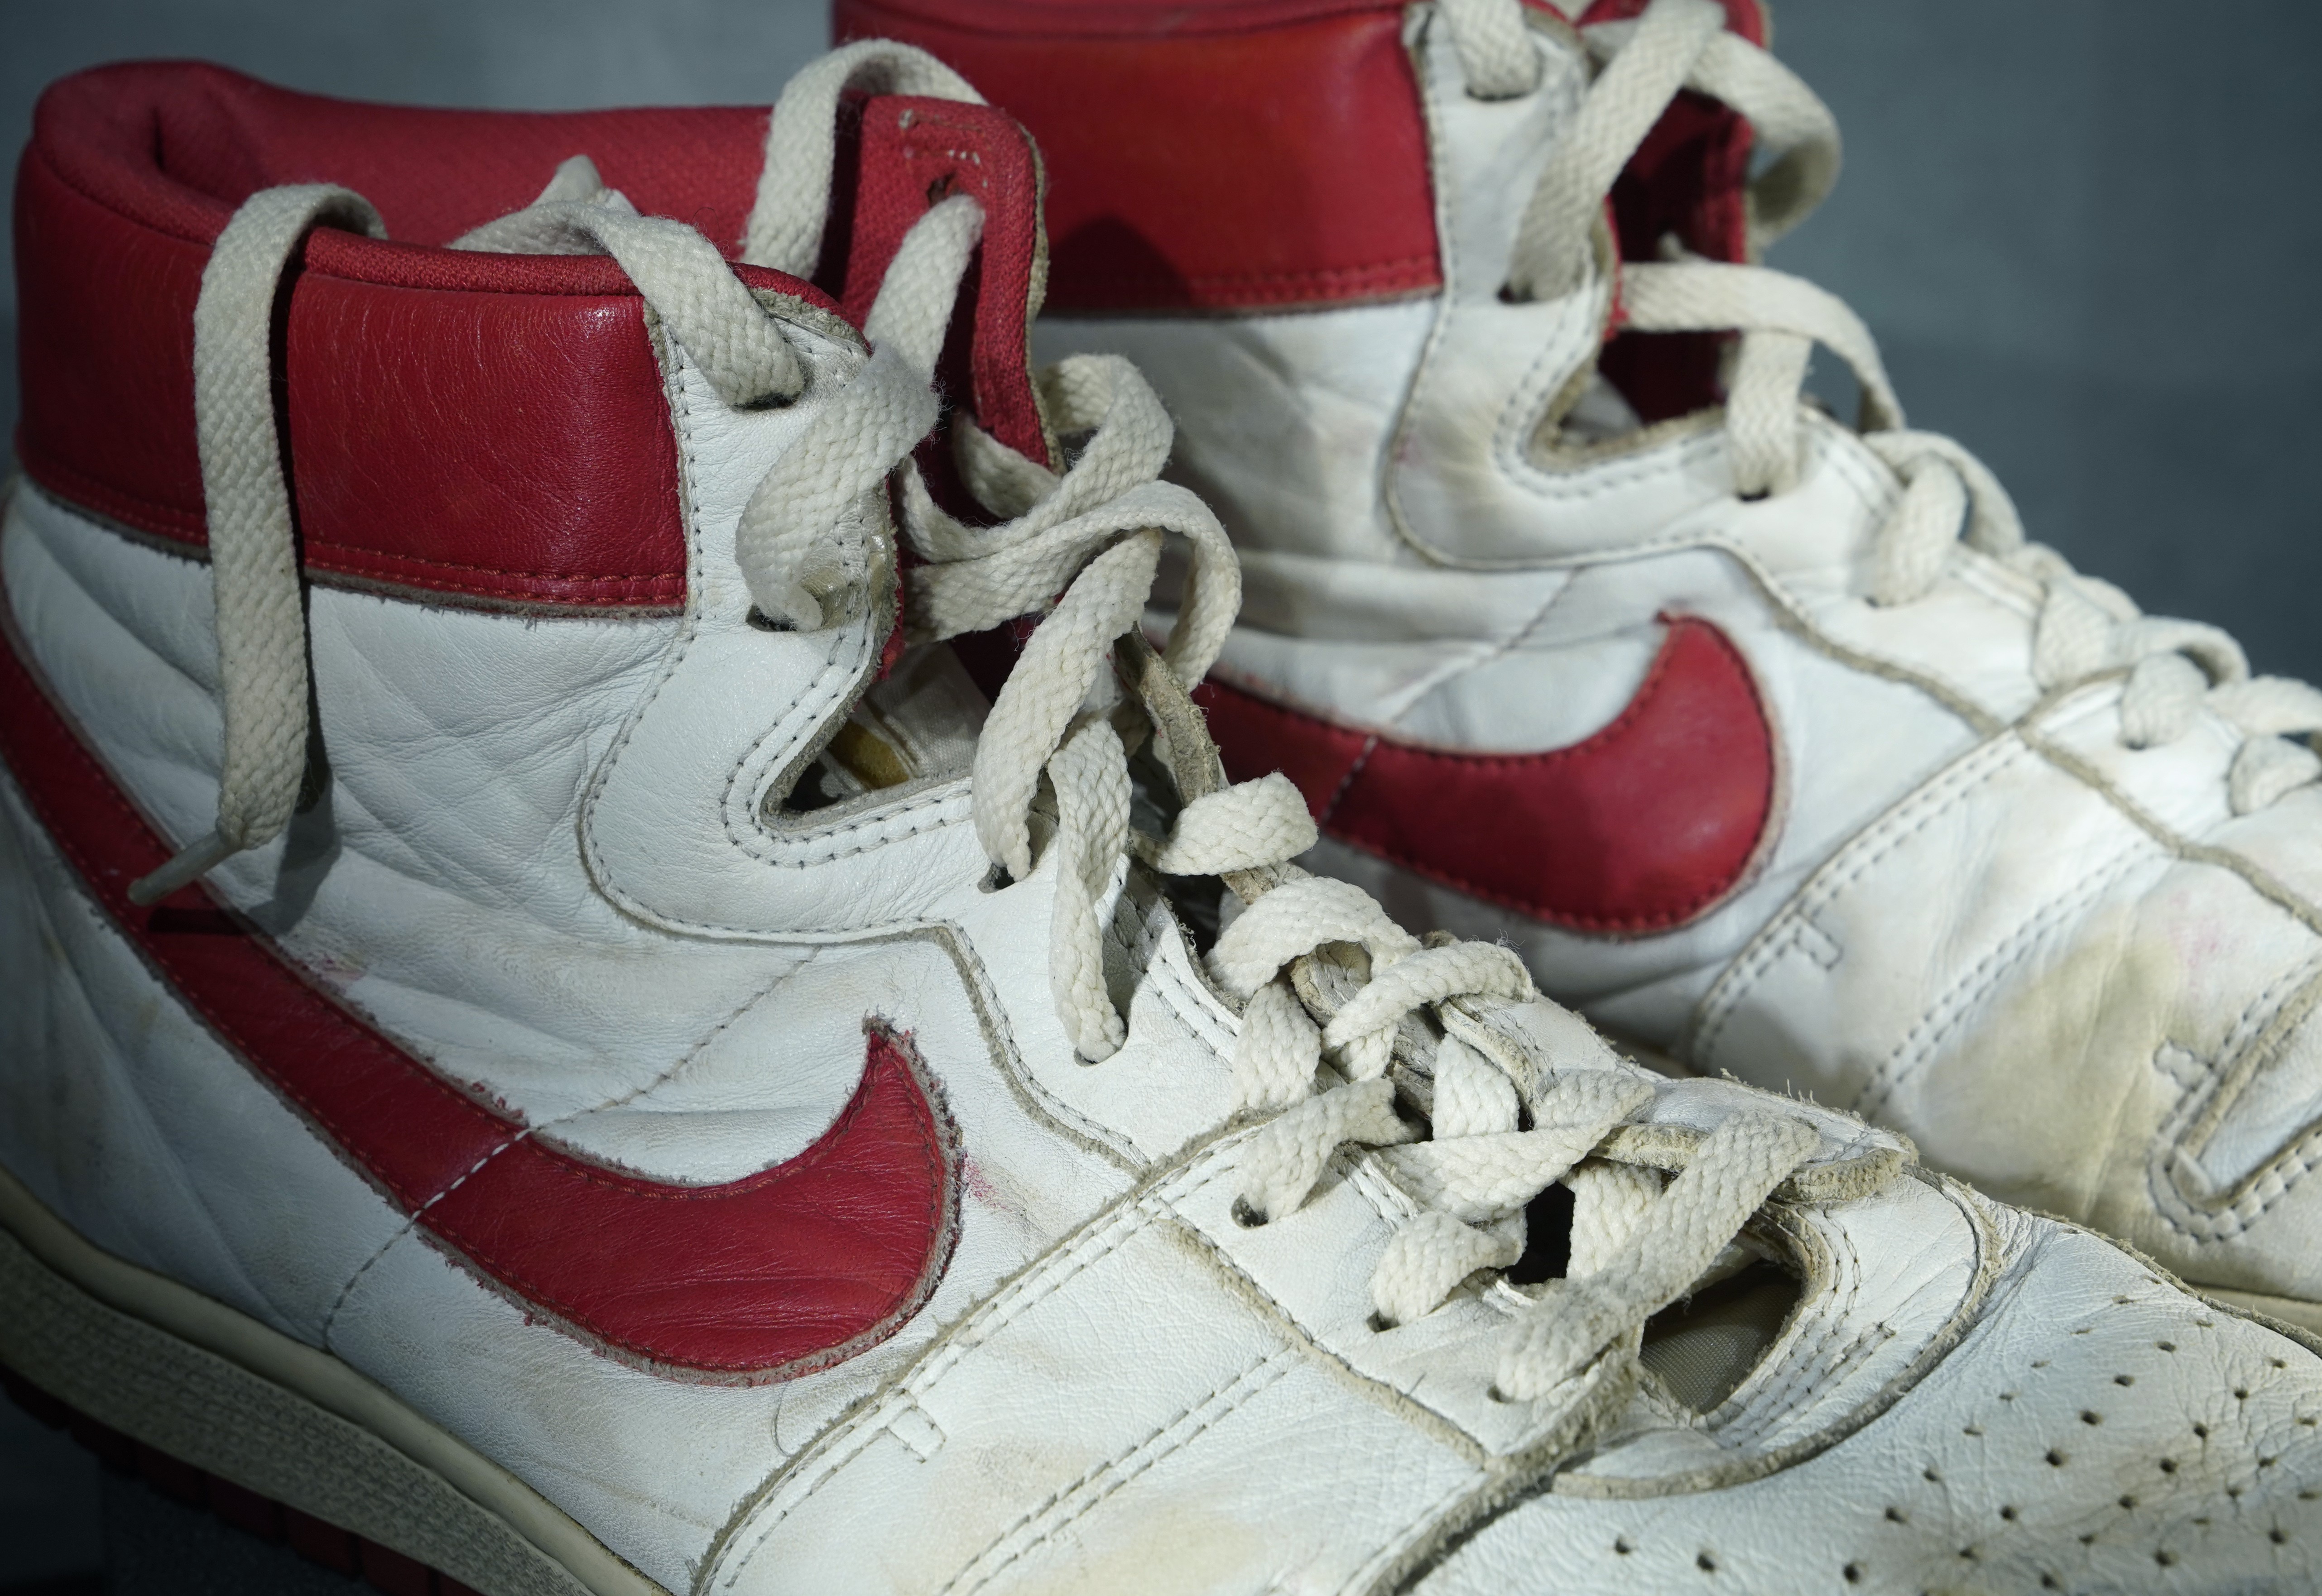 Rare Nike shoes worn by Michael Jordan during rookie season sell at auction  for record $ million 